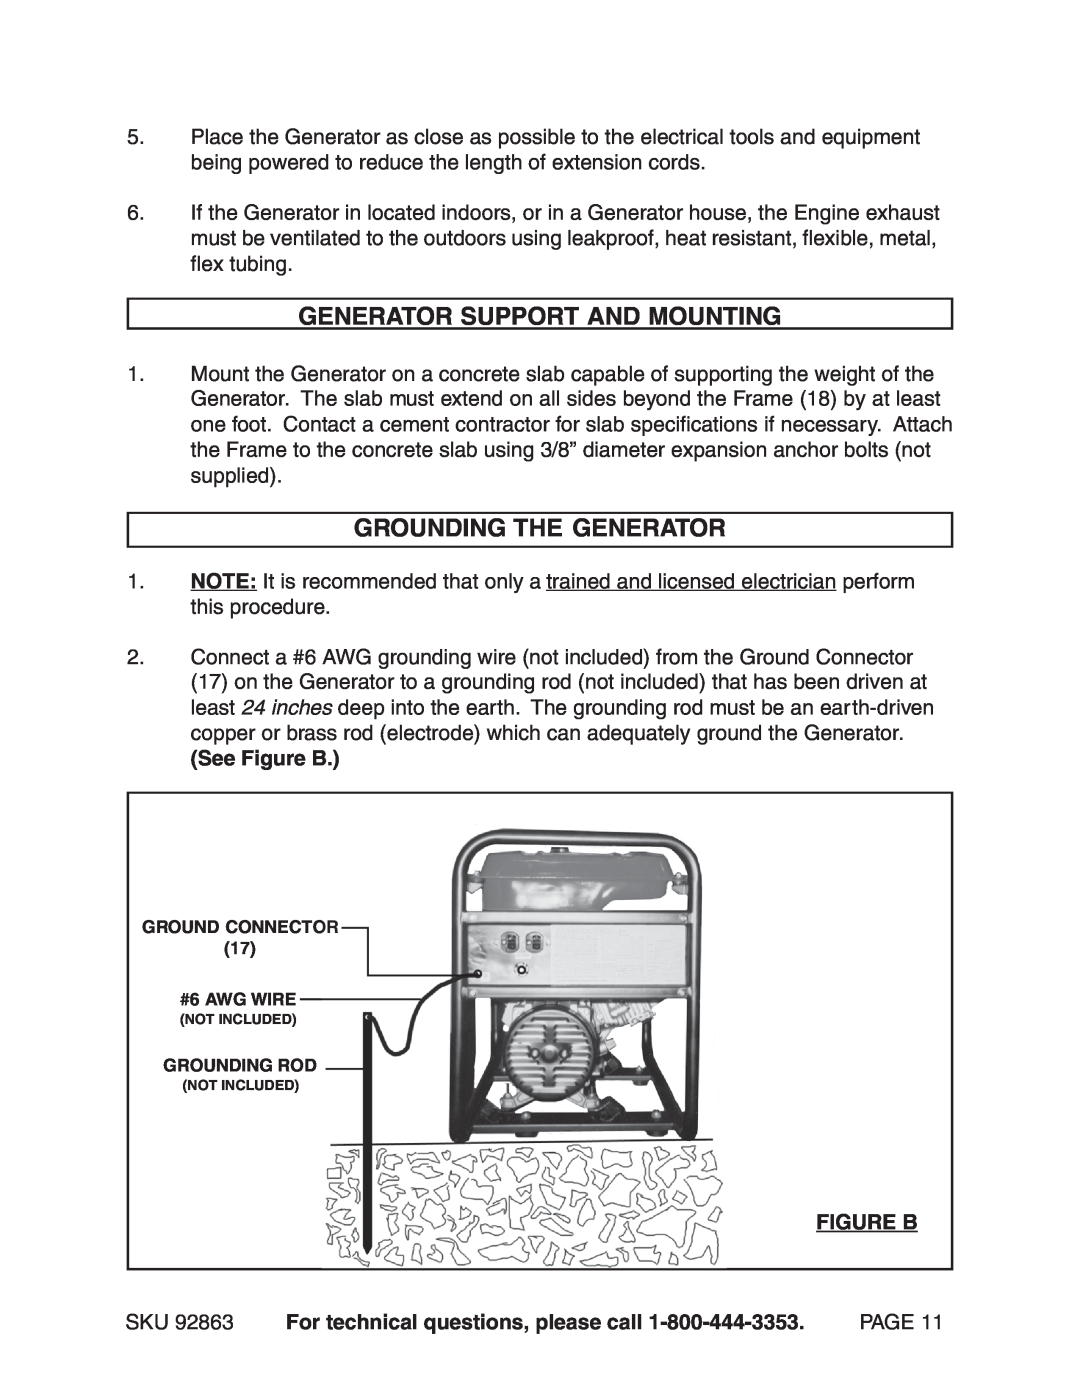 Harbor Freight Tools 92863 operating instructions Generator Support And Mounting, Grounding The Generator, See Figure B 